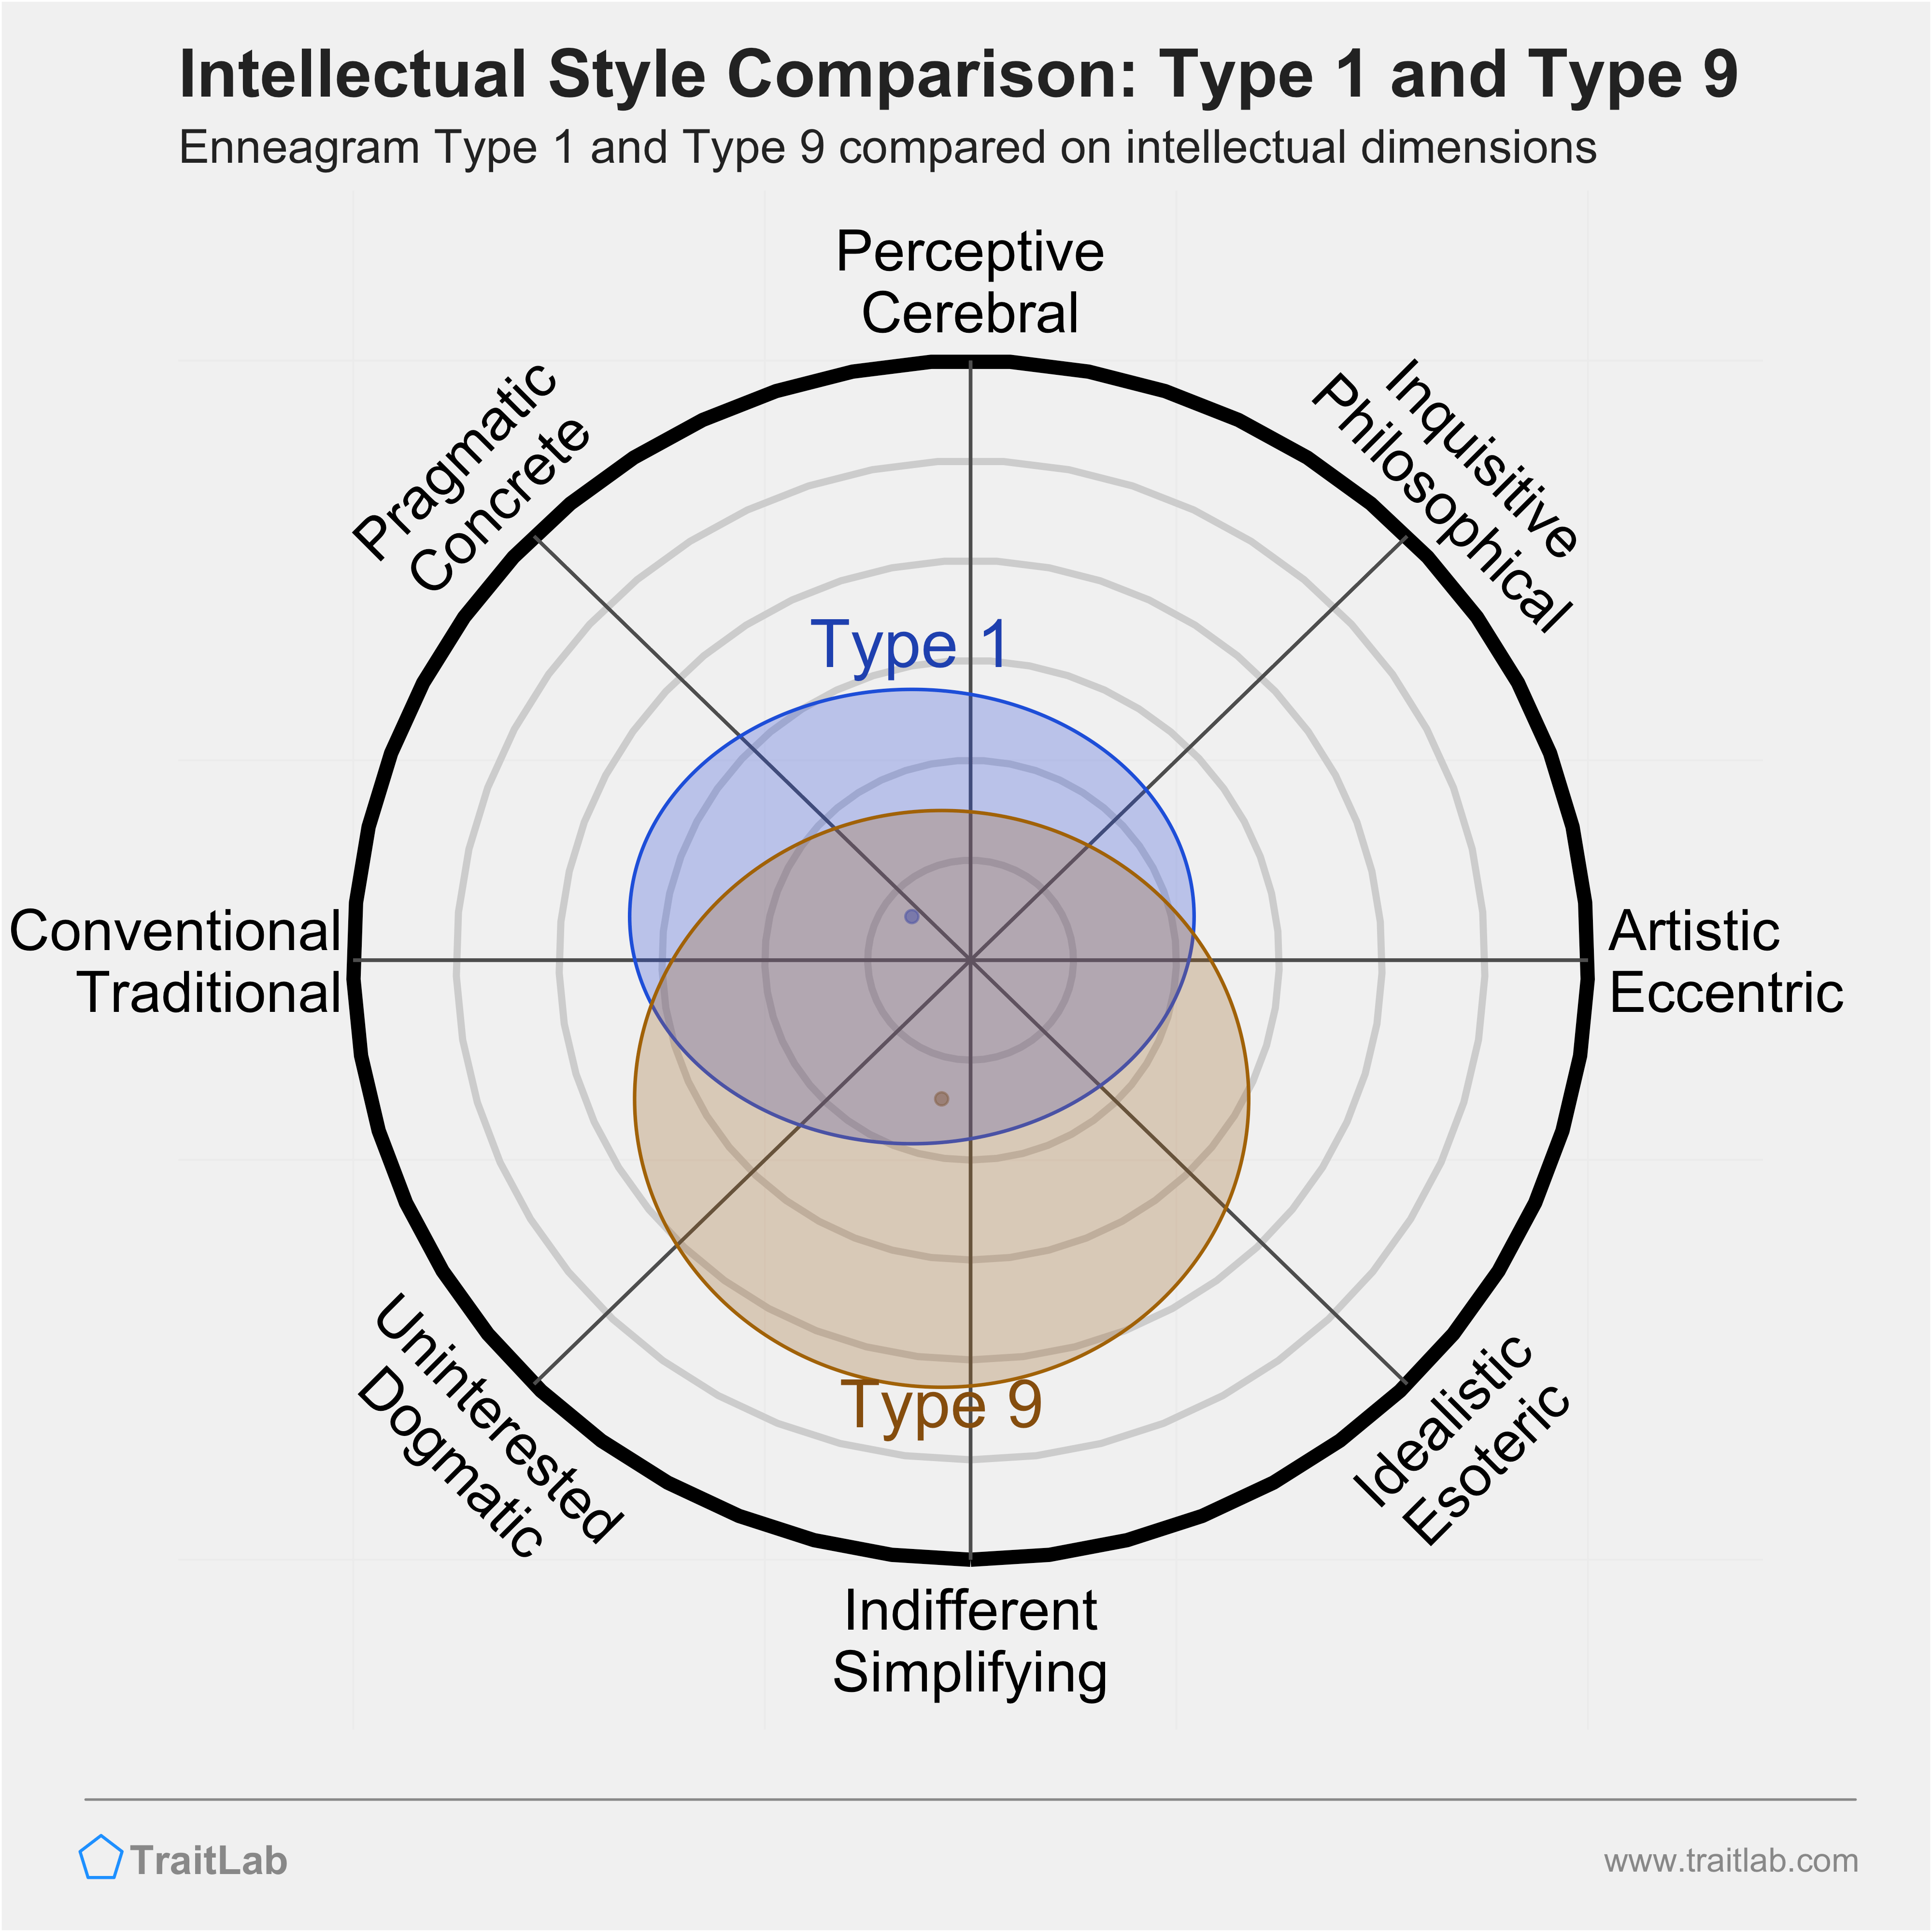 Type 1 and Type 9 comparison across intellectual dimensions